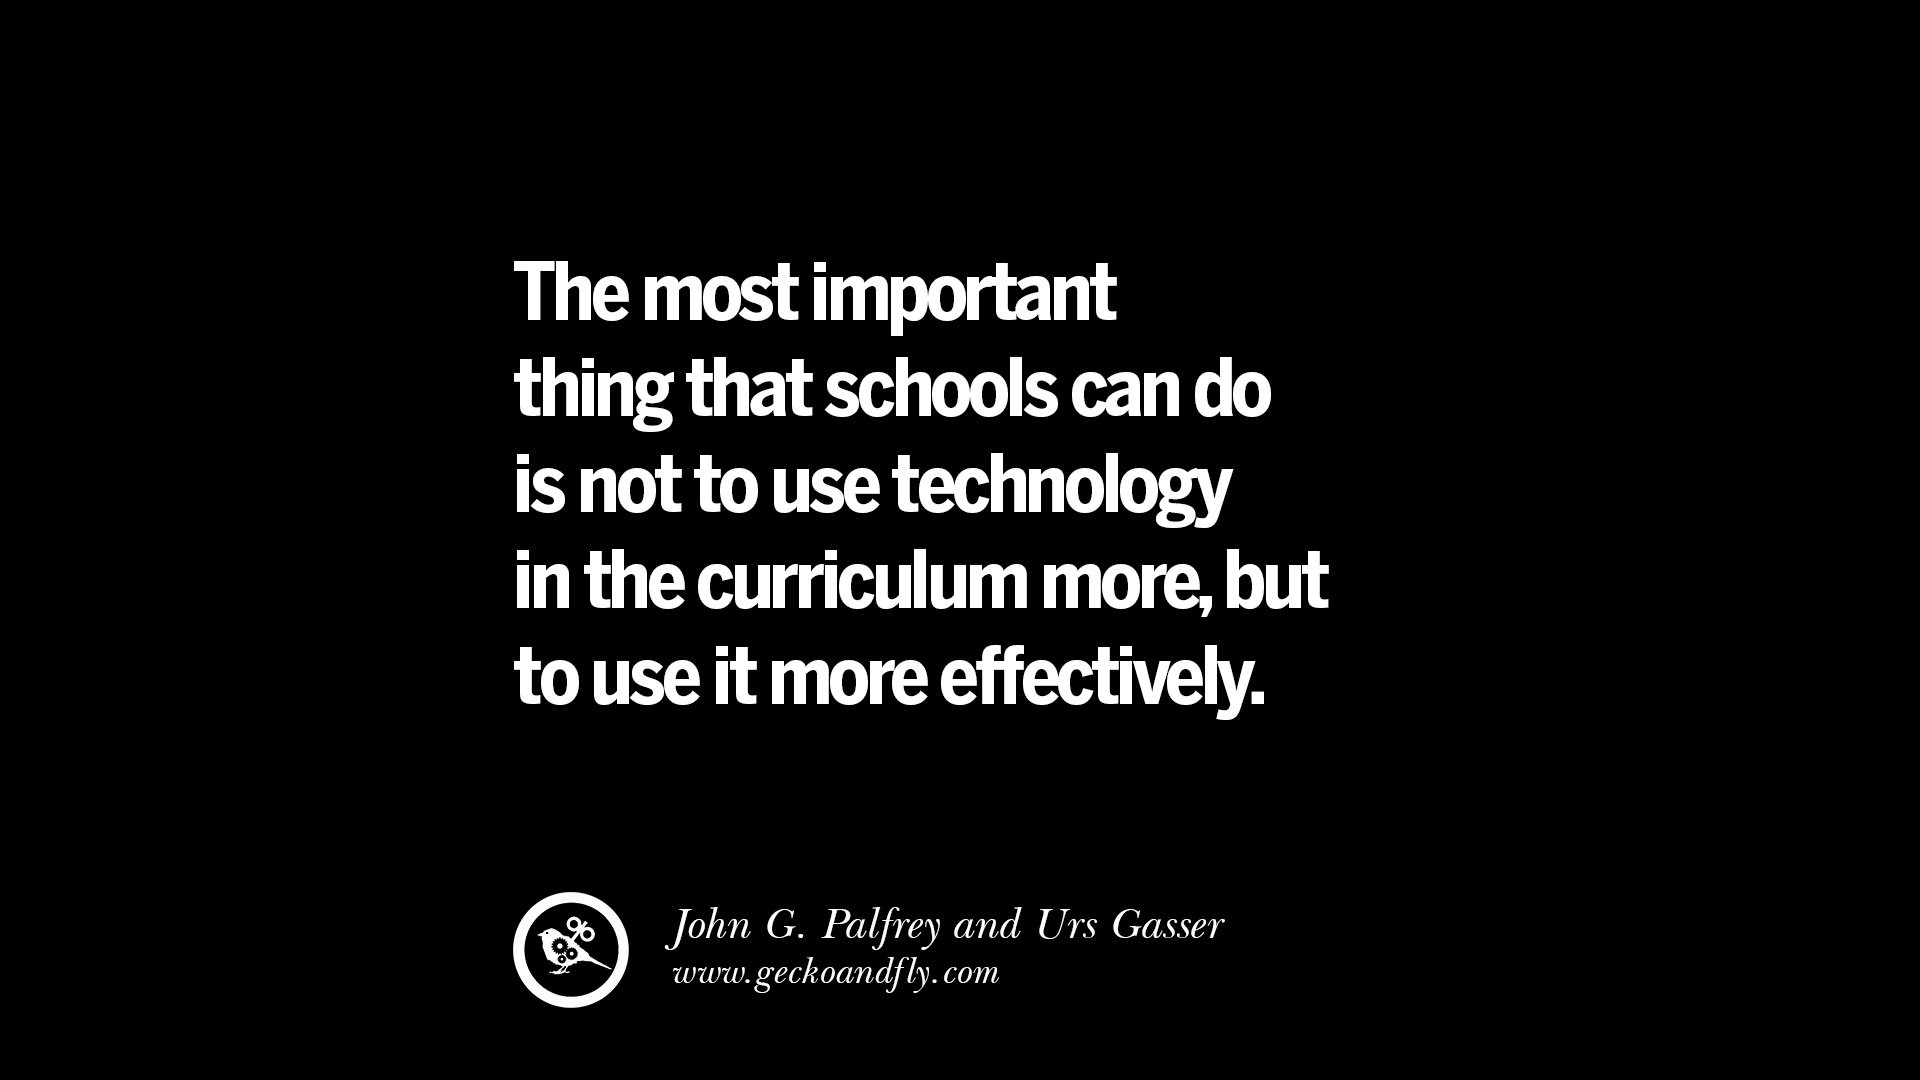 Technology In Education Quotes
 21 Famous Quotes on Education School and Knowledge